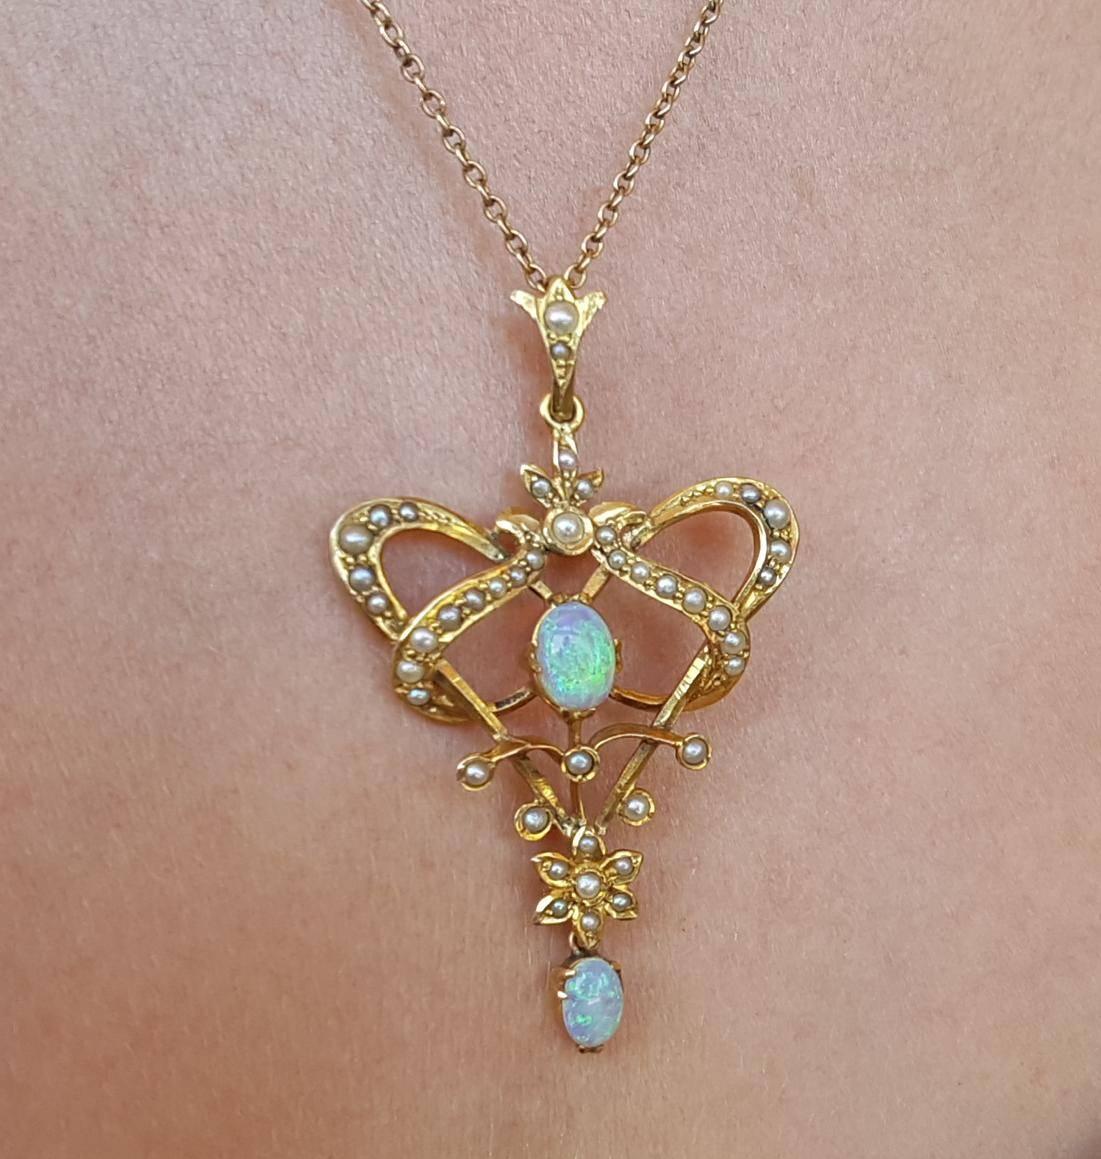 Very pretty 9ct gold art nouveau pendant featuring 2 oval opals and seed pearls in an organic floral design. The dimensions are approximately 3cm wide and 5cm long from top of bale to bottom of opal drop. Sinuous art nouveau elements in this